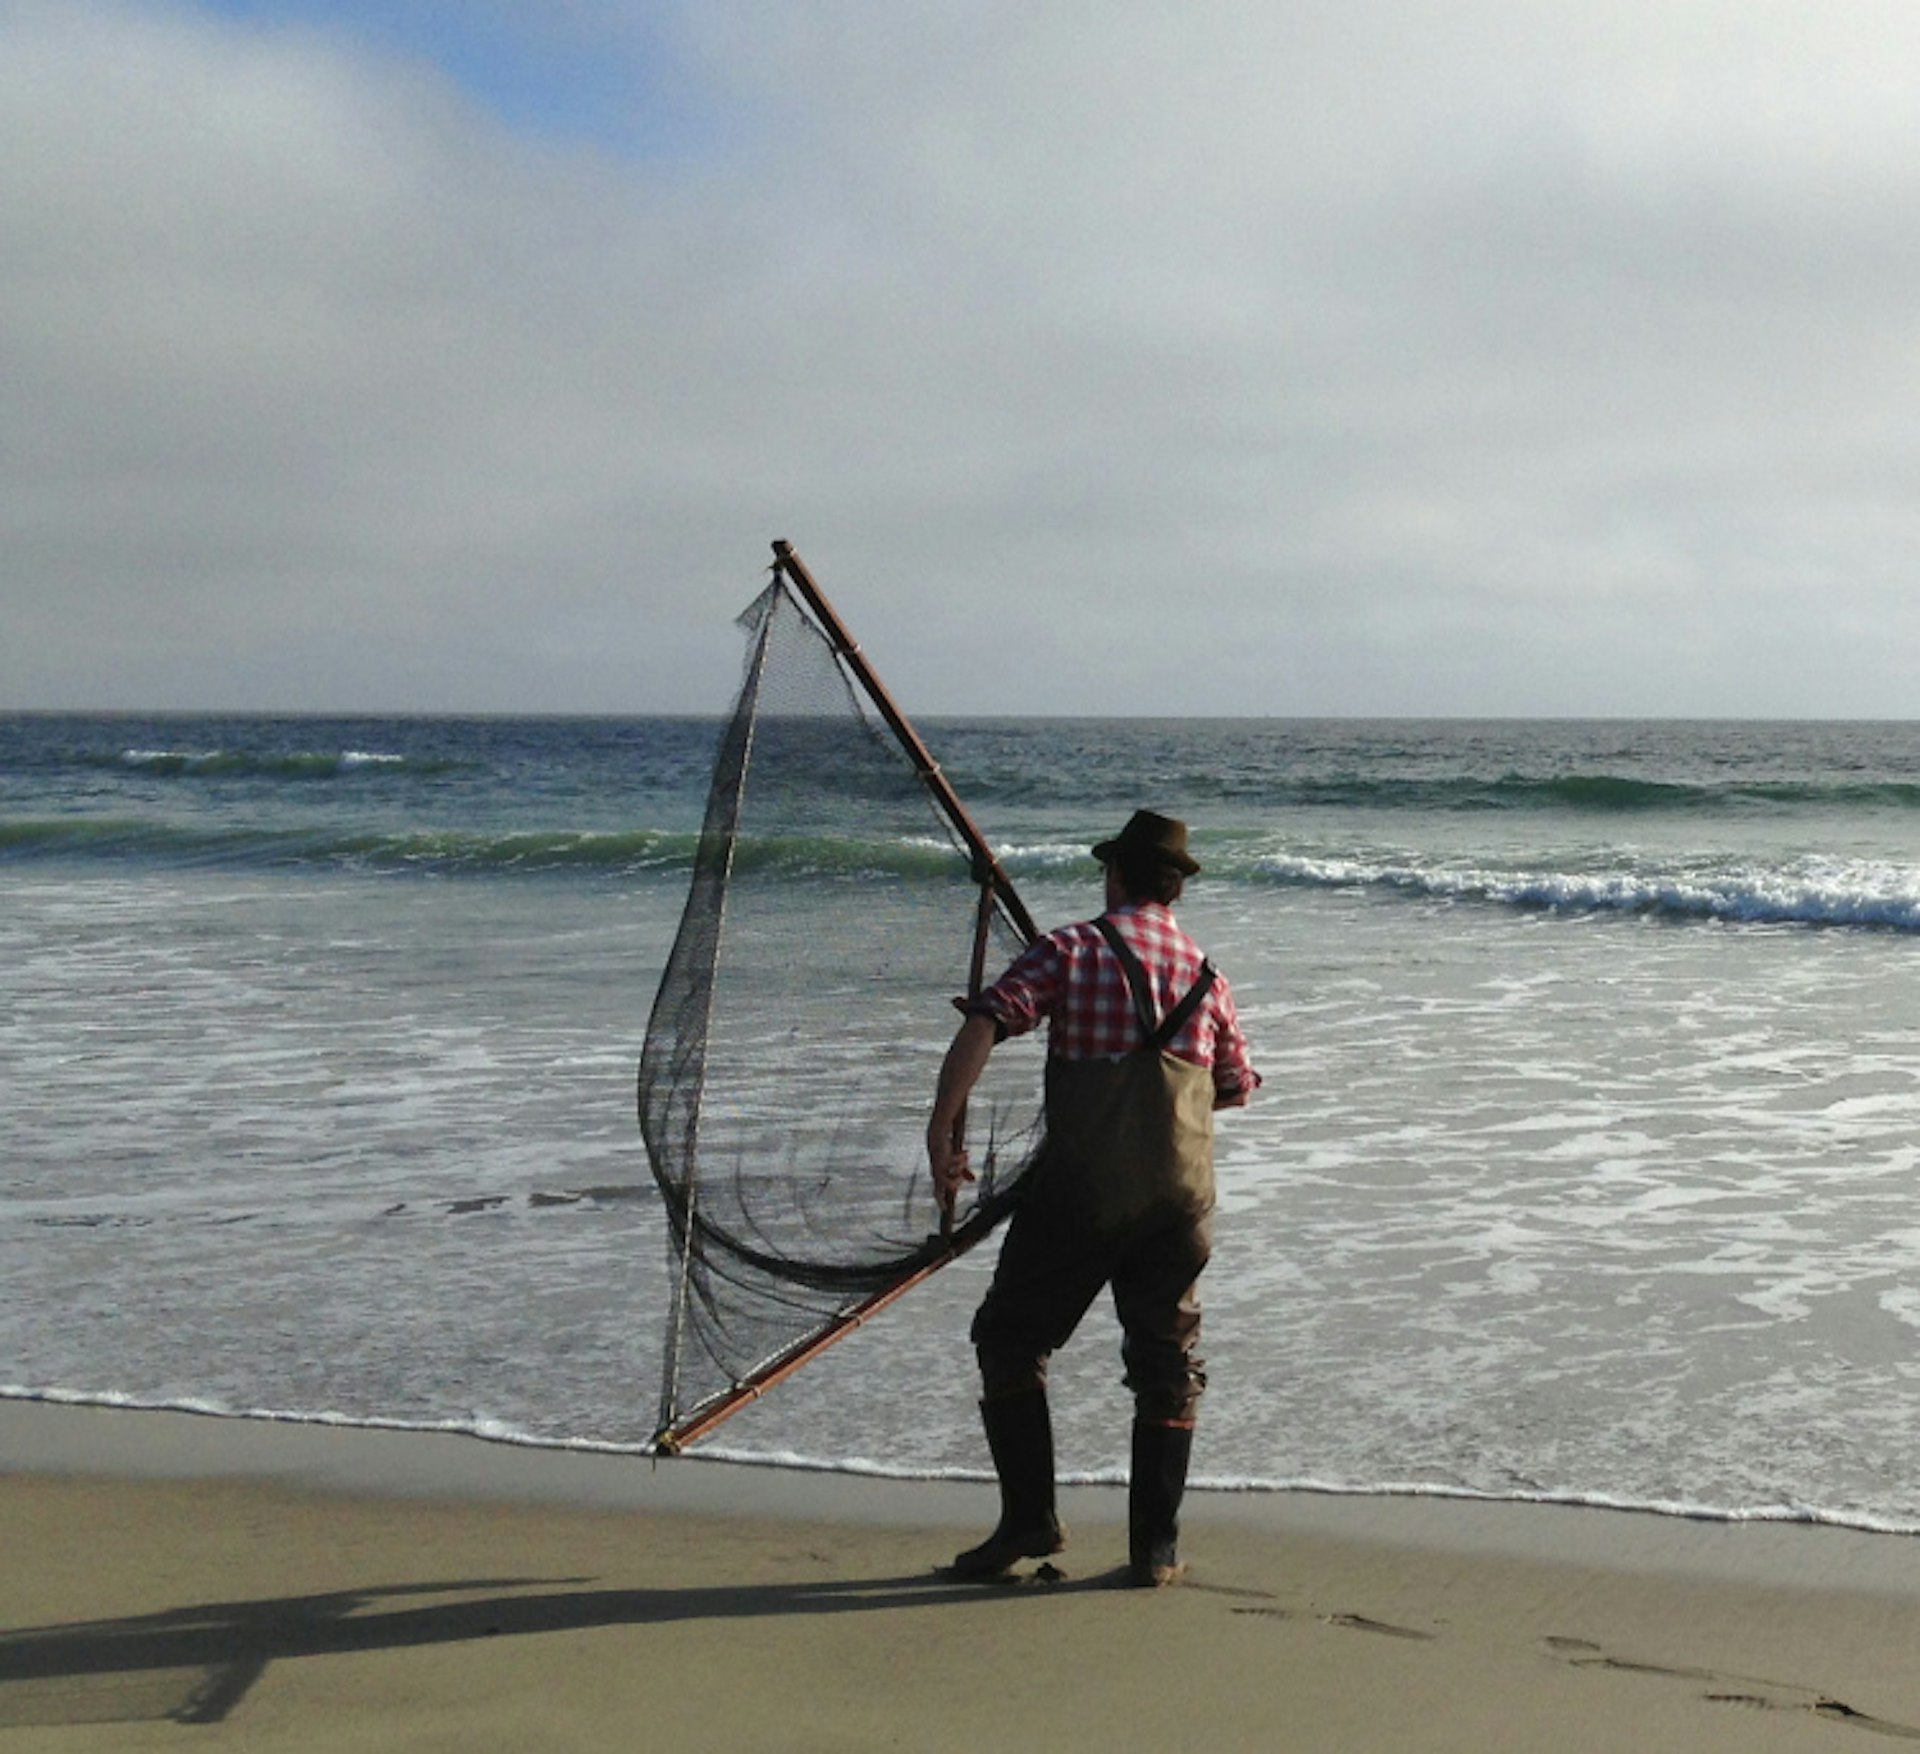 Kirk the forager catching his dinner at the beach. Image by Alison Bing / Lonely Planet